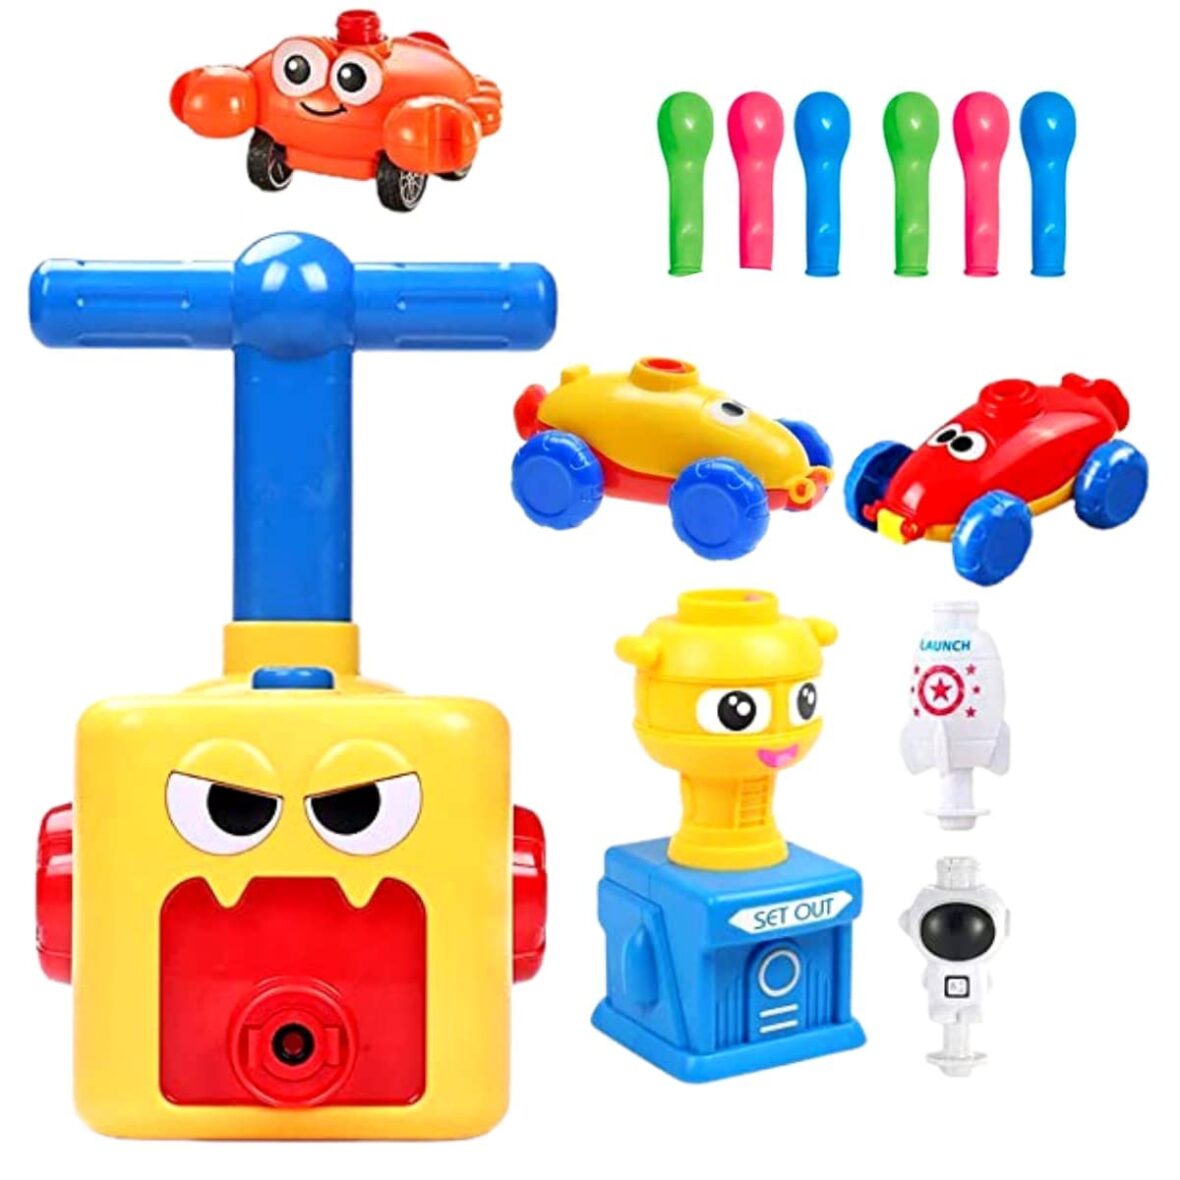 Balloon Launcher for Kids, Power Balloon Car Toy for Kids, Manual Balloon Pump Cars Toys for Boys Girls (Multi Color)